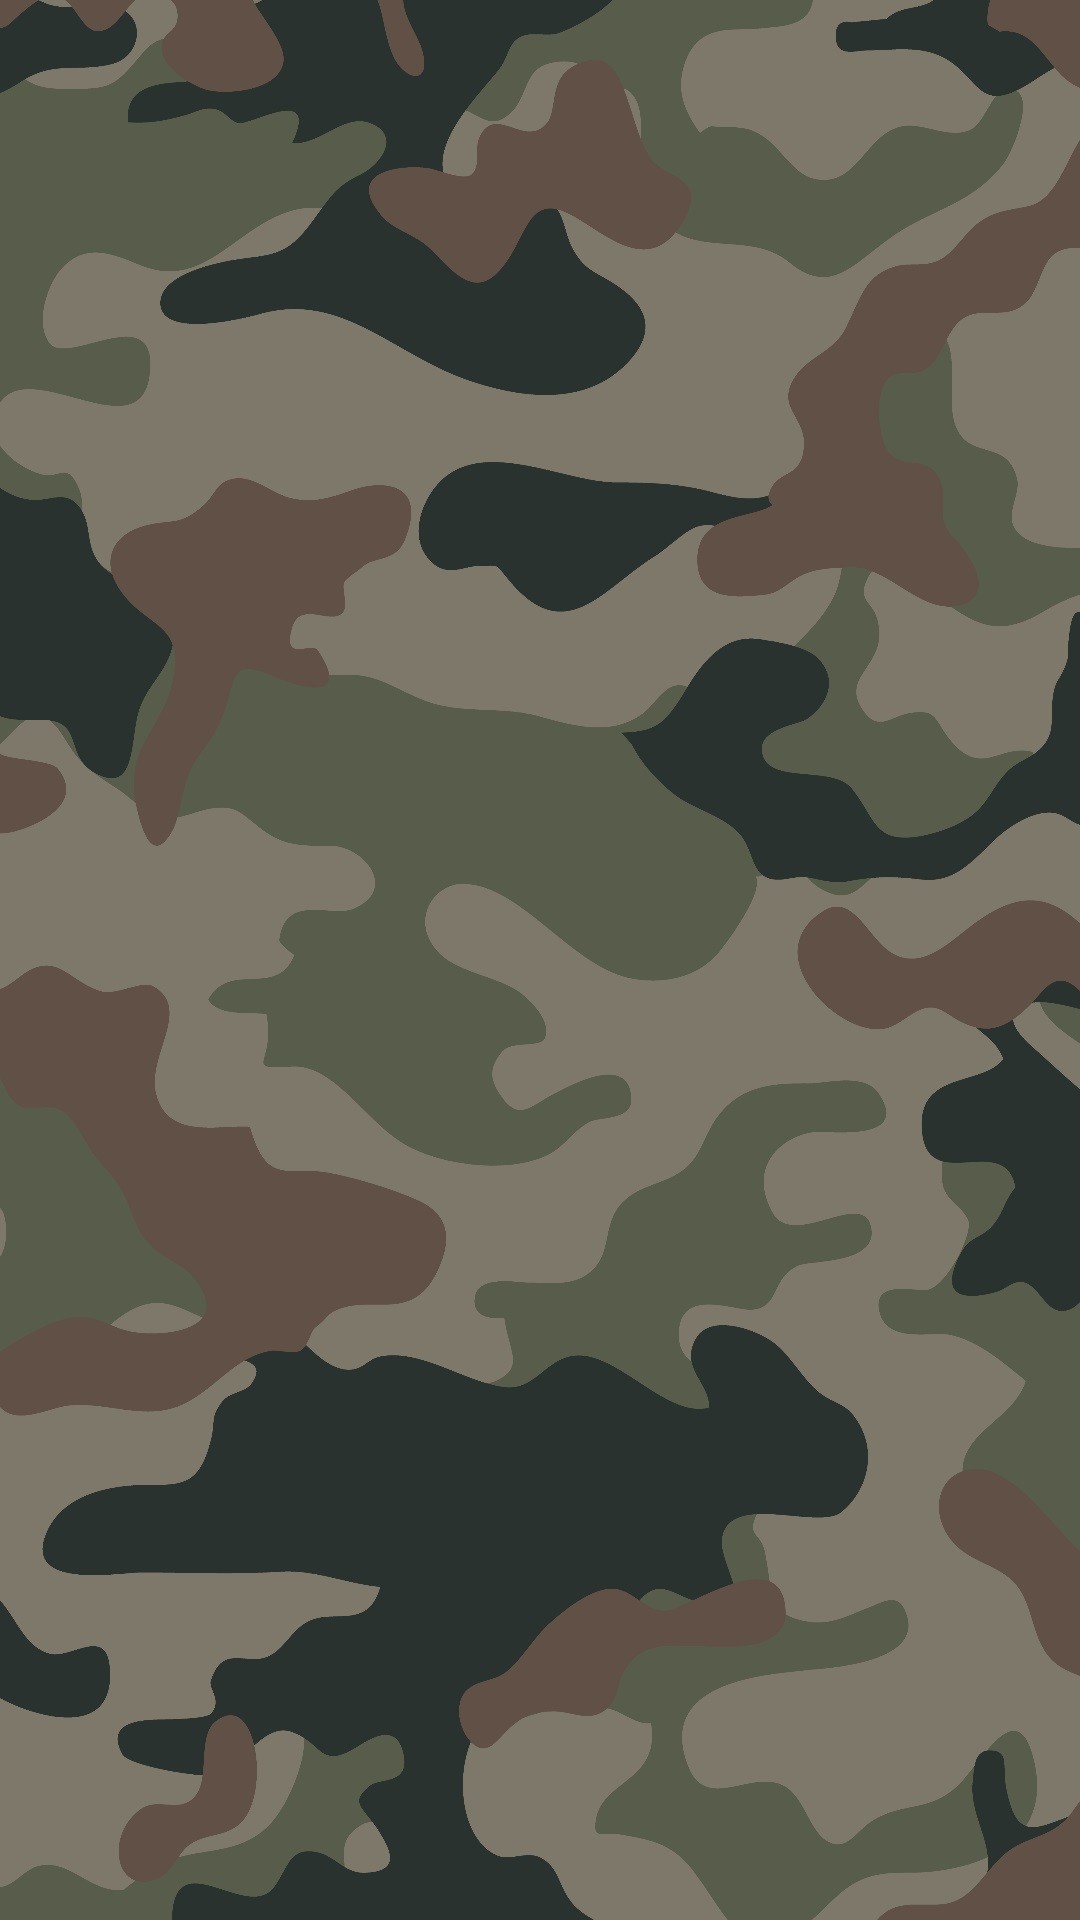 1080x1920 Camouflage wallpaper for iPhone or Android. Tags: camo, hunting, army,  backgrounds